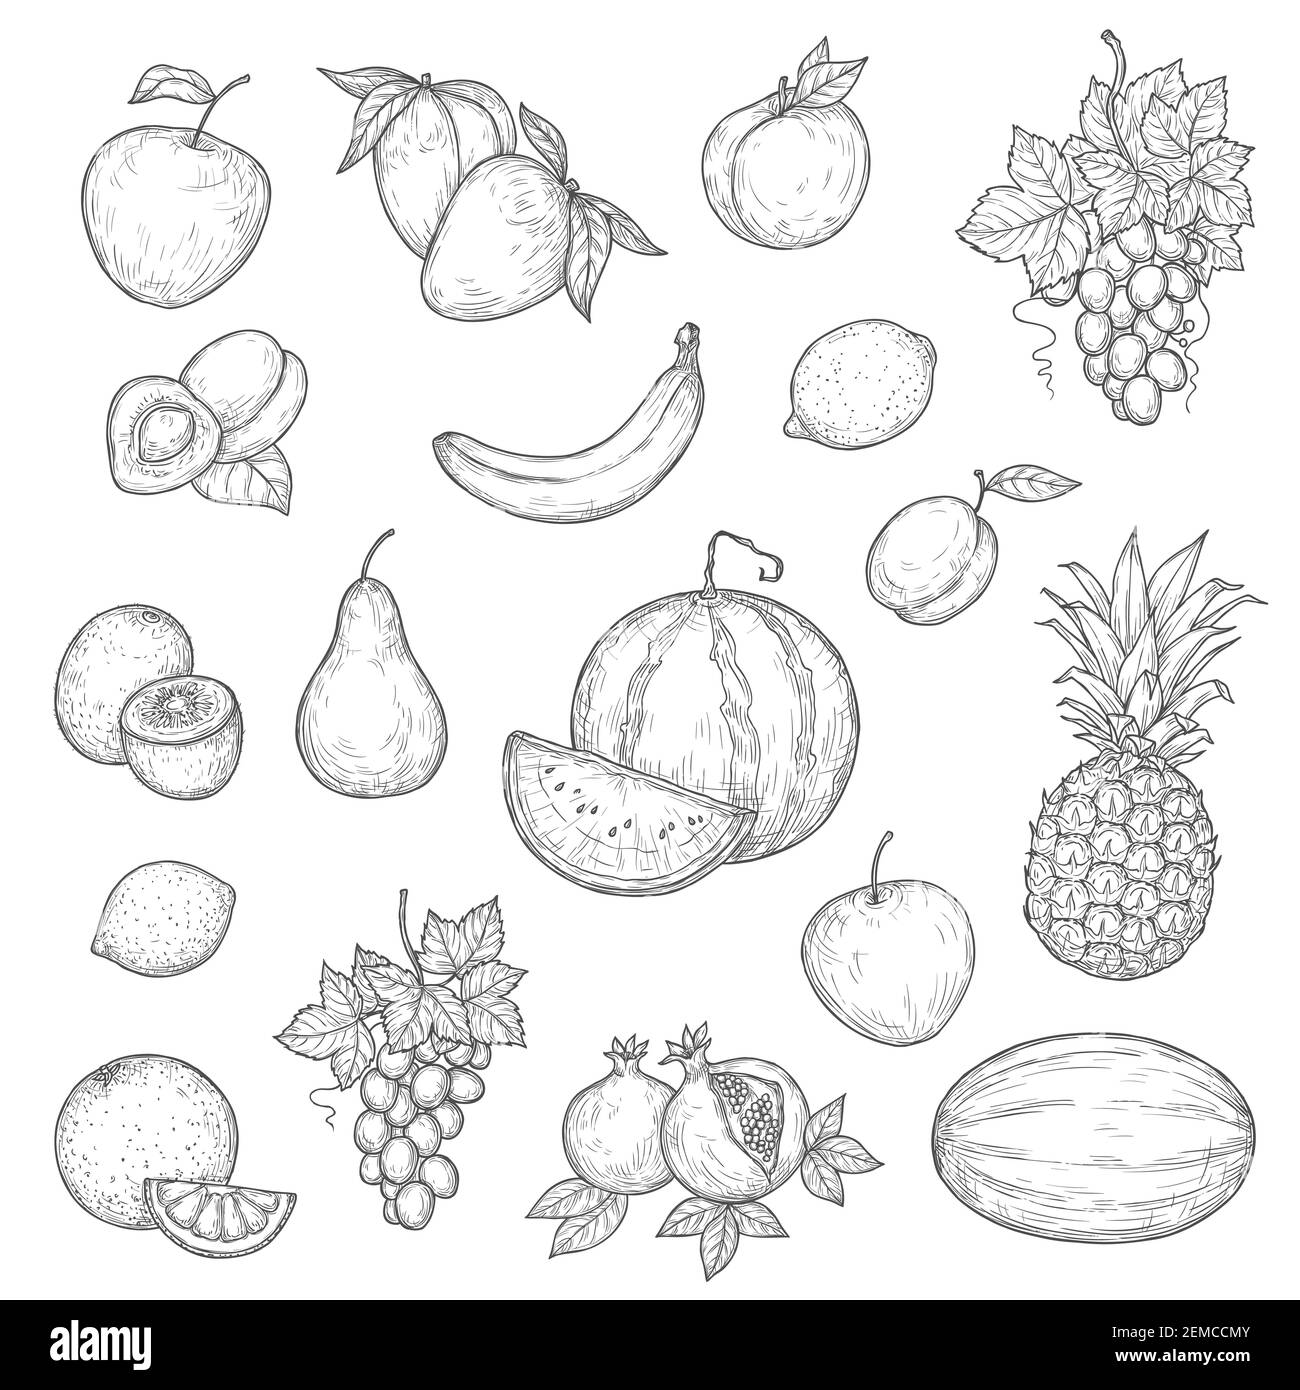 Plum sketches Black and White Stock Photos & Images - Alamy